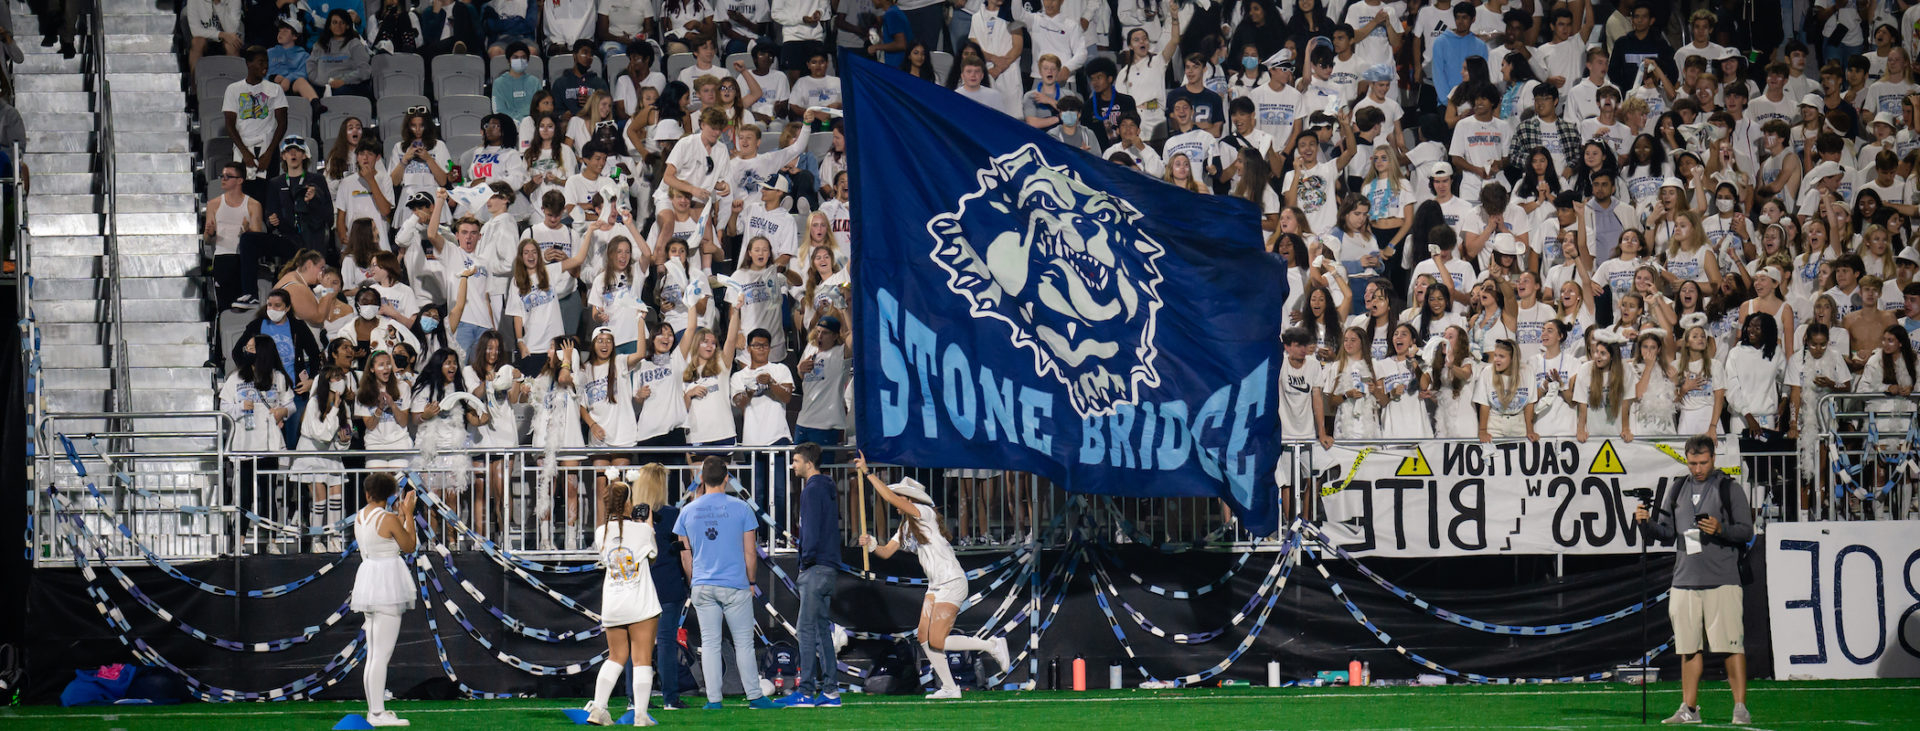 Field runner flag for Stone Bridge High School carried by cheerleader in front of crowd